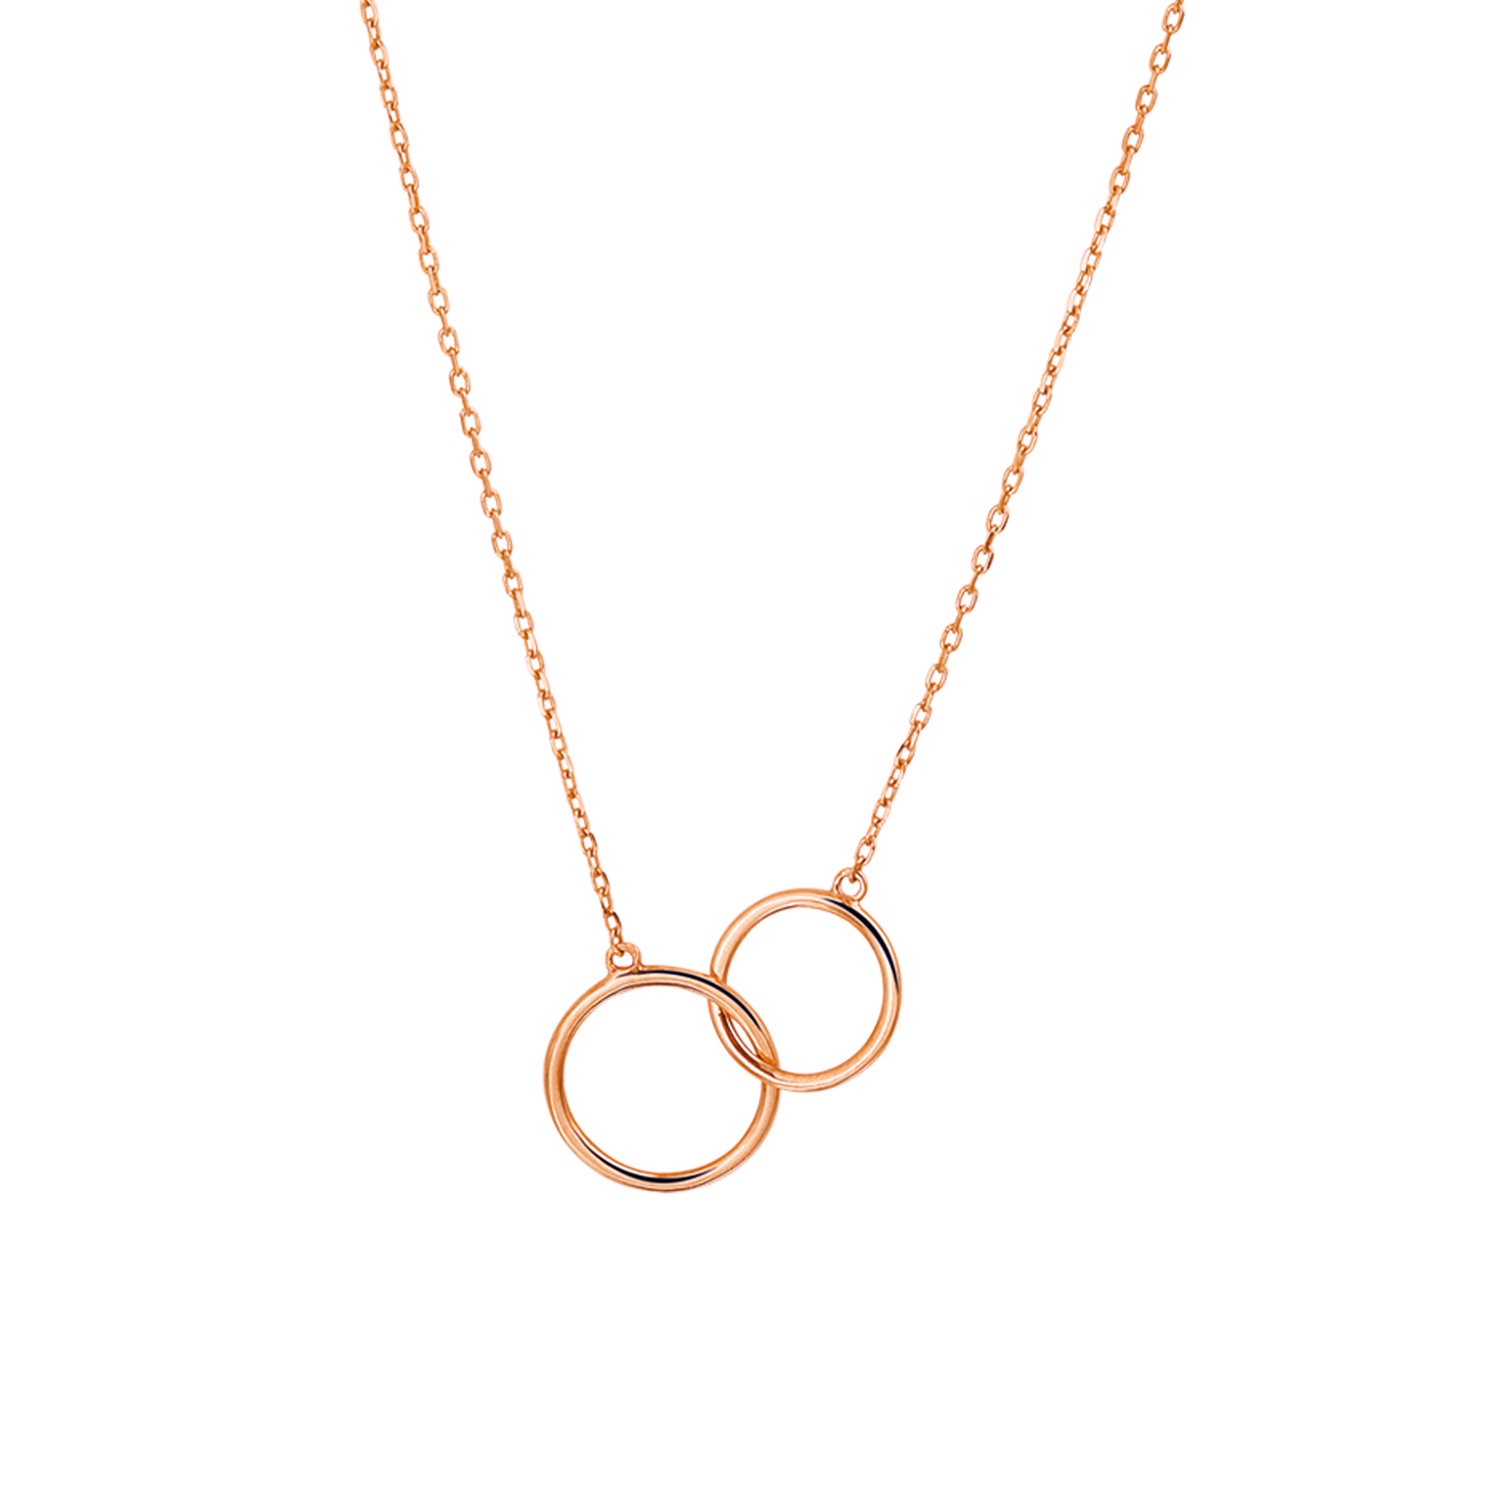 Luik Beeldhouwer kans Necklace Rounds 14K Rose Gold – Jewellery by Sophie